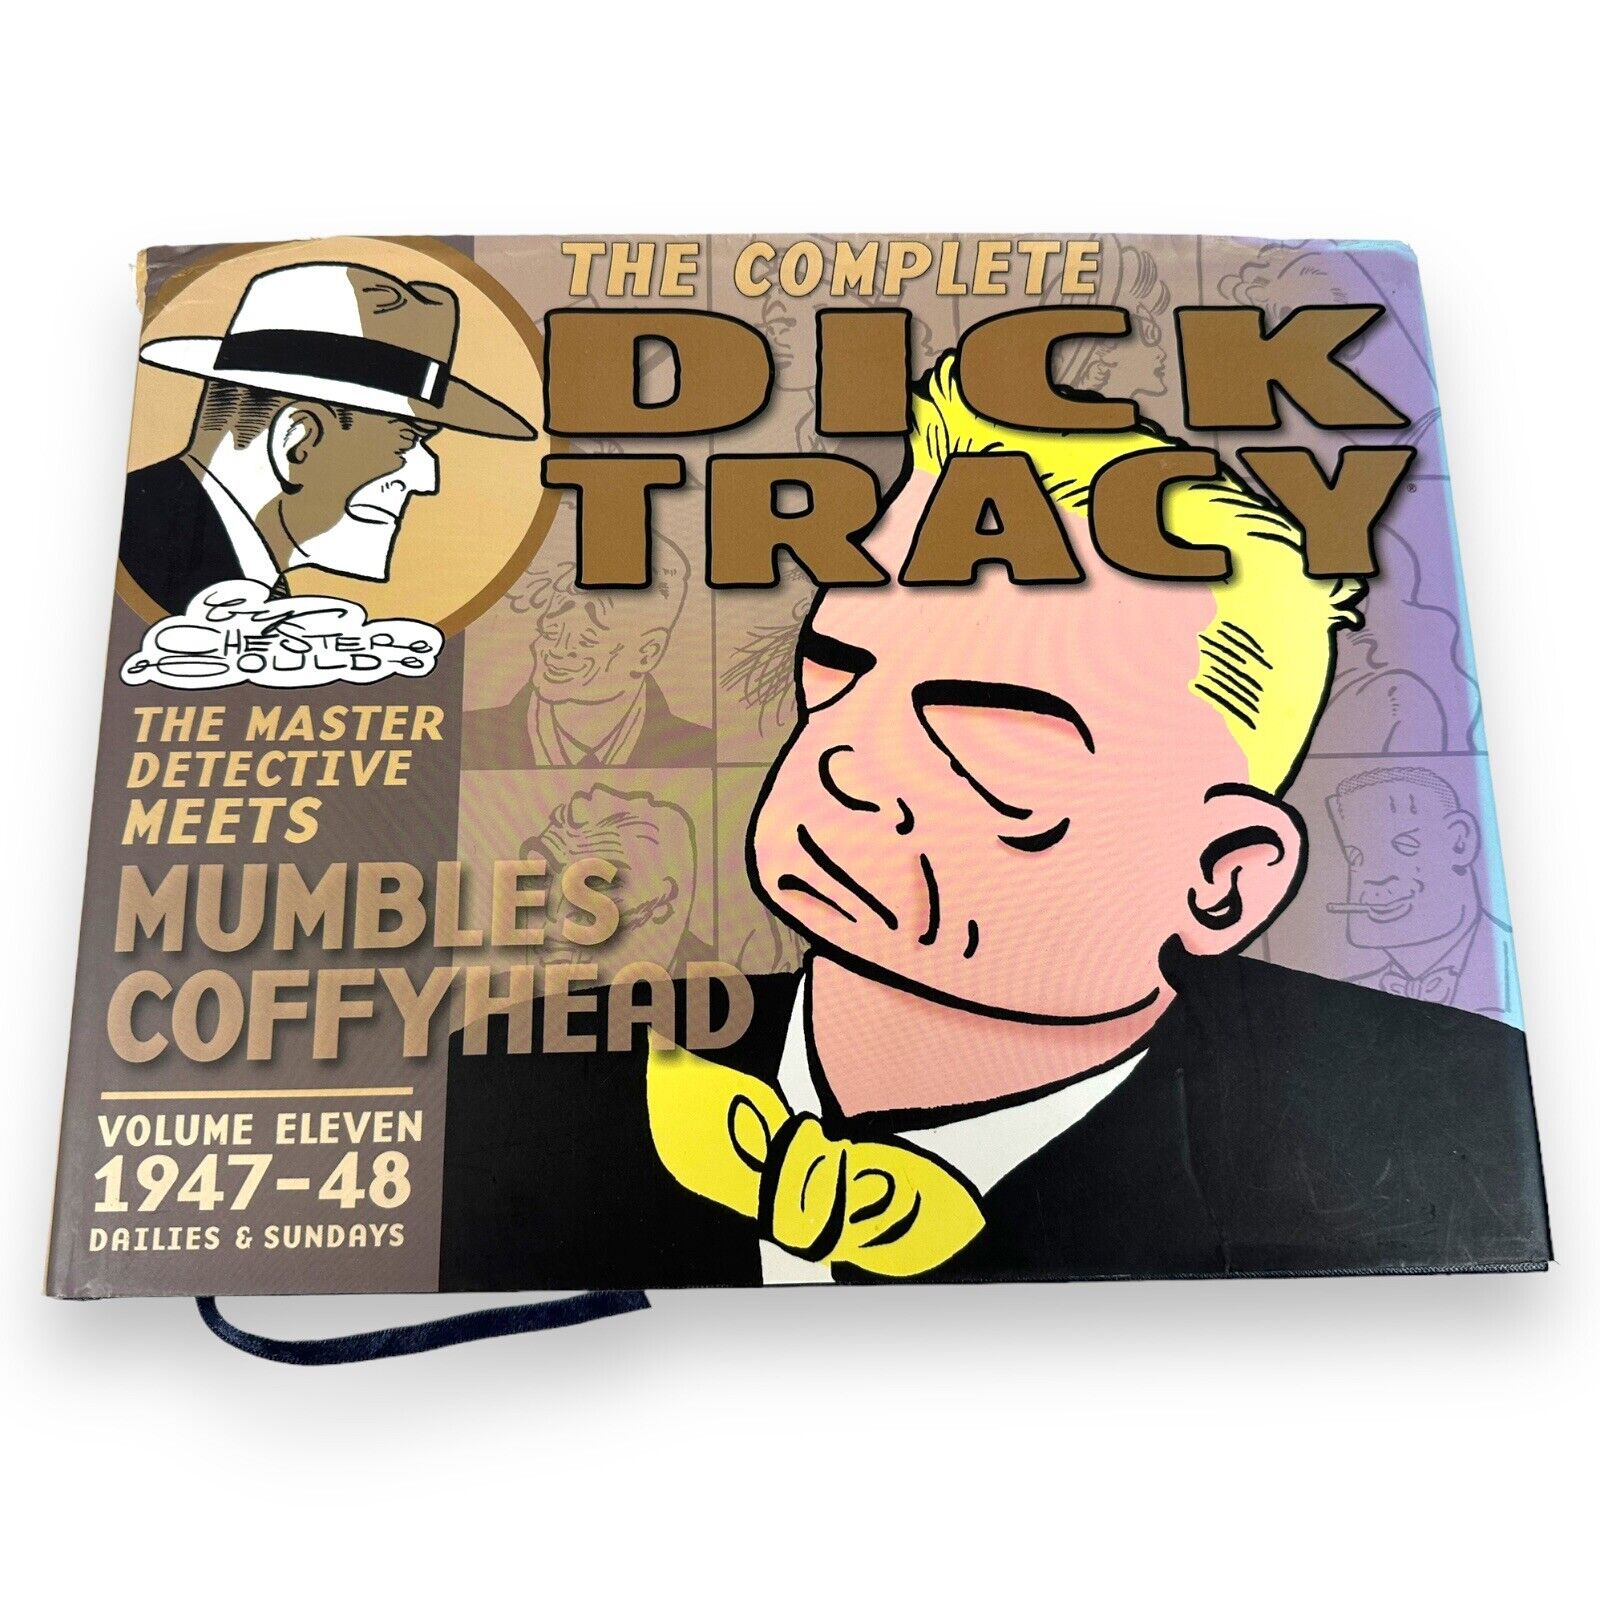 The Complete Dick Tracy: Mumbles Coffyhead Vol #11 1st pr 2011, Chester Gould